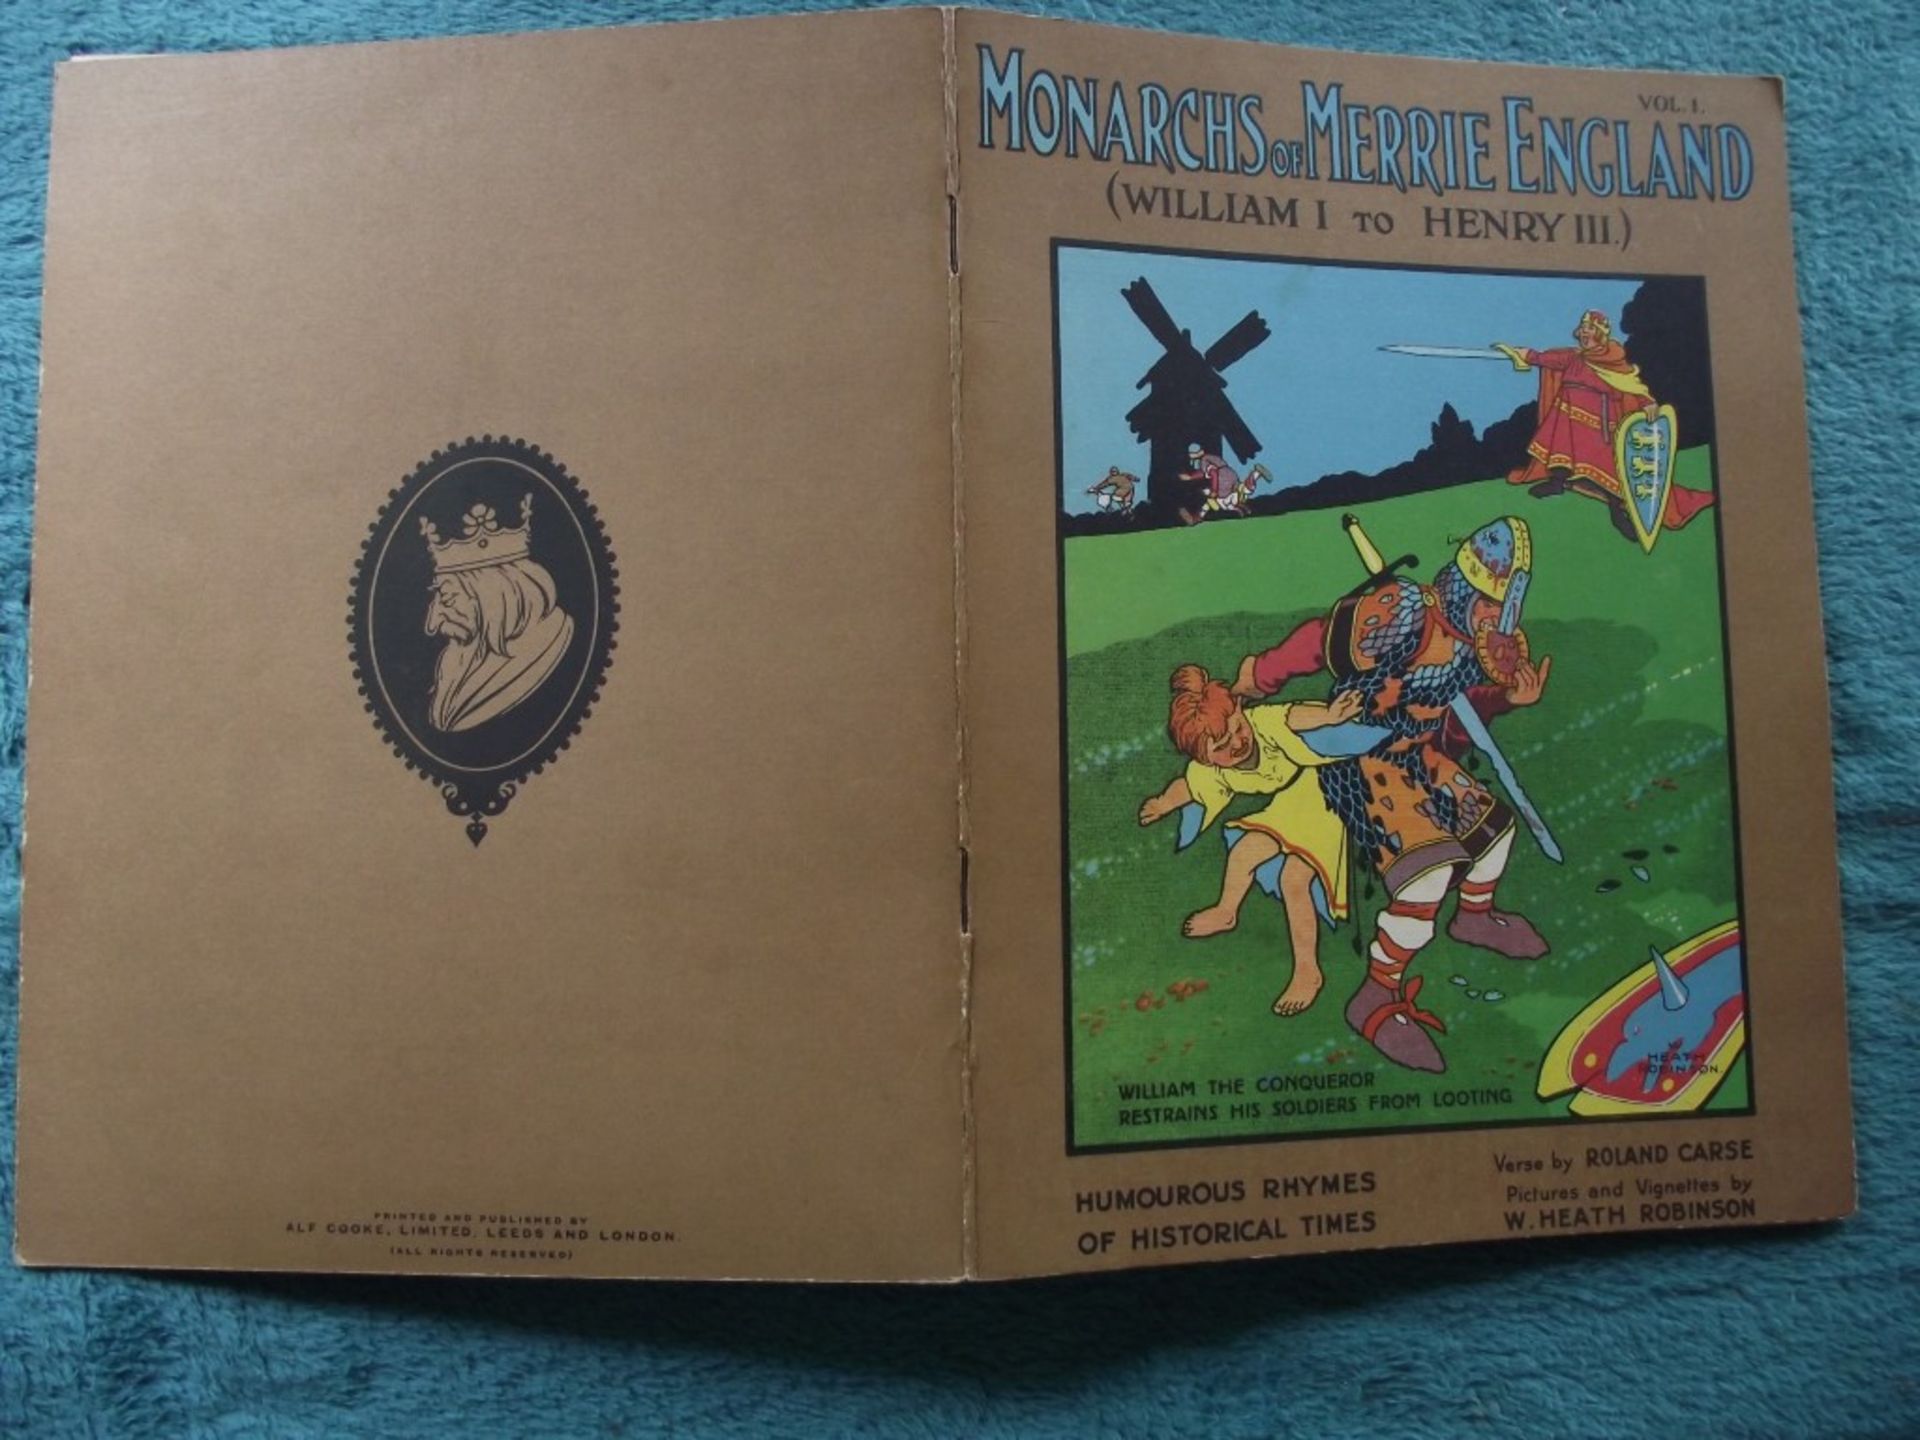 Monarchs of Merrie England By Roland Carse - Illustrated By W. Heath Robinson - Original Box. - Image 4 of 22